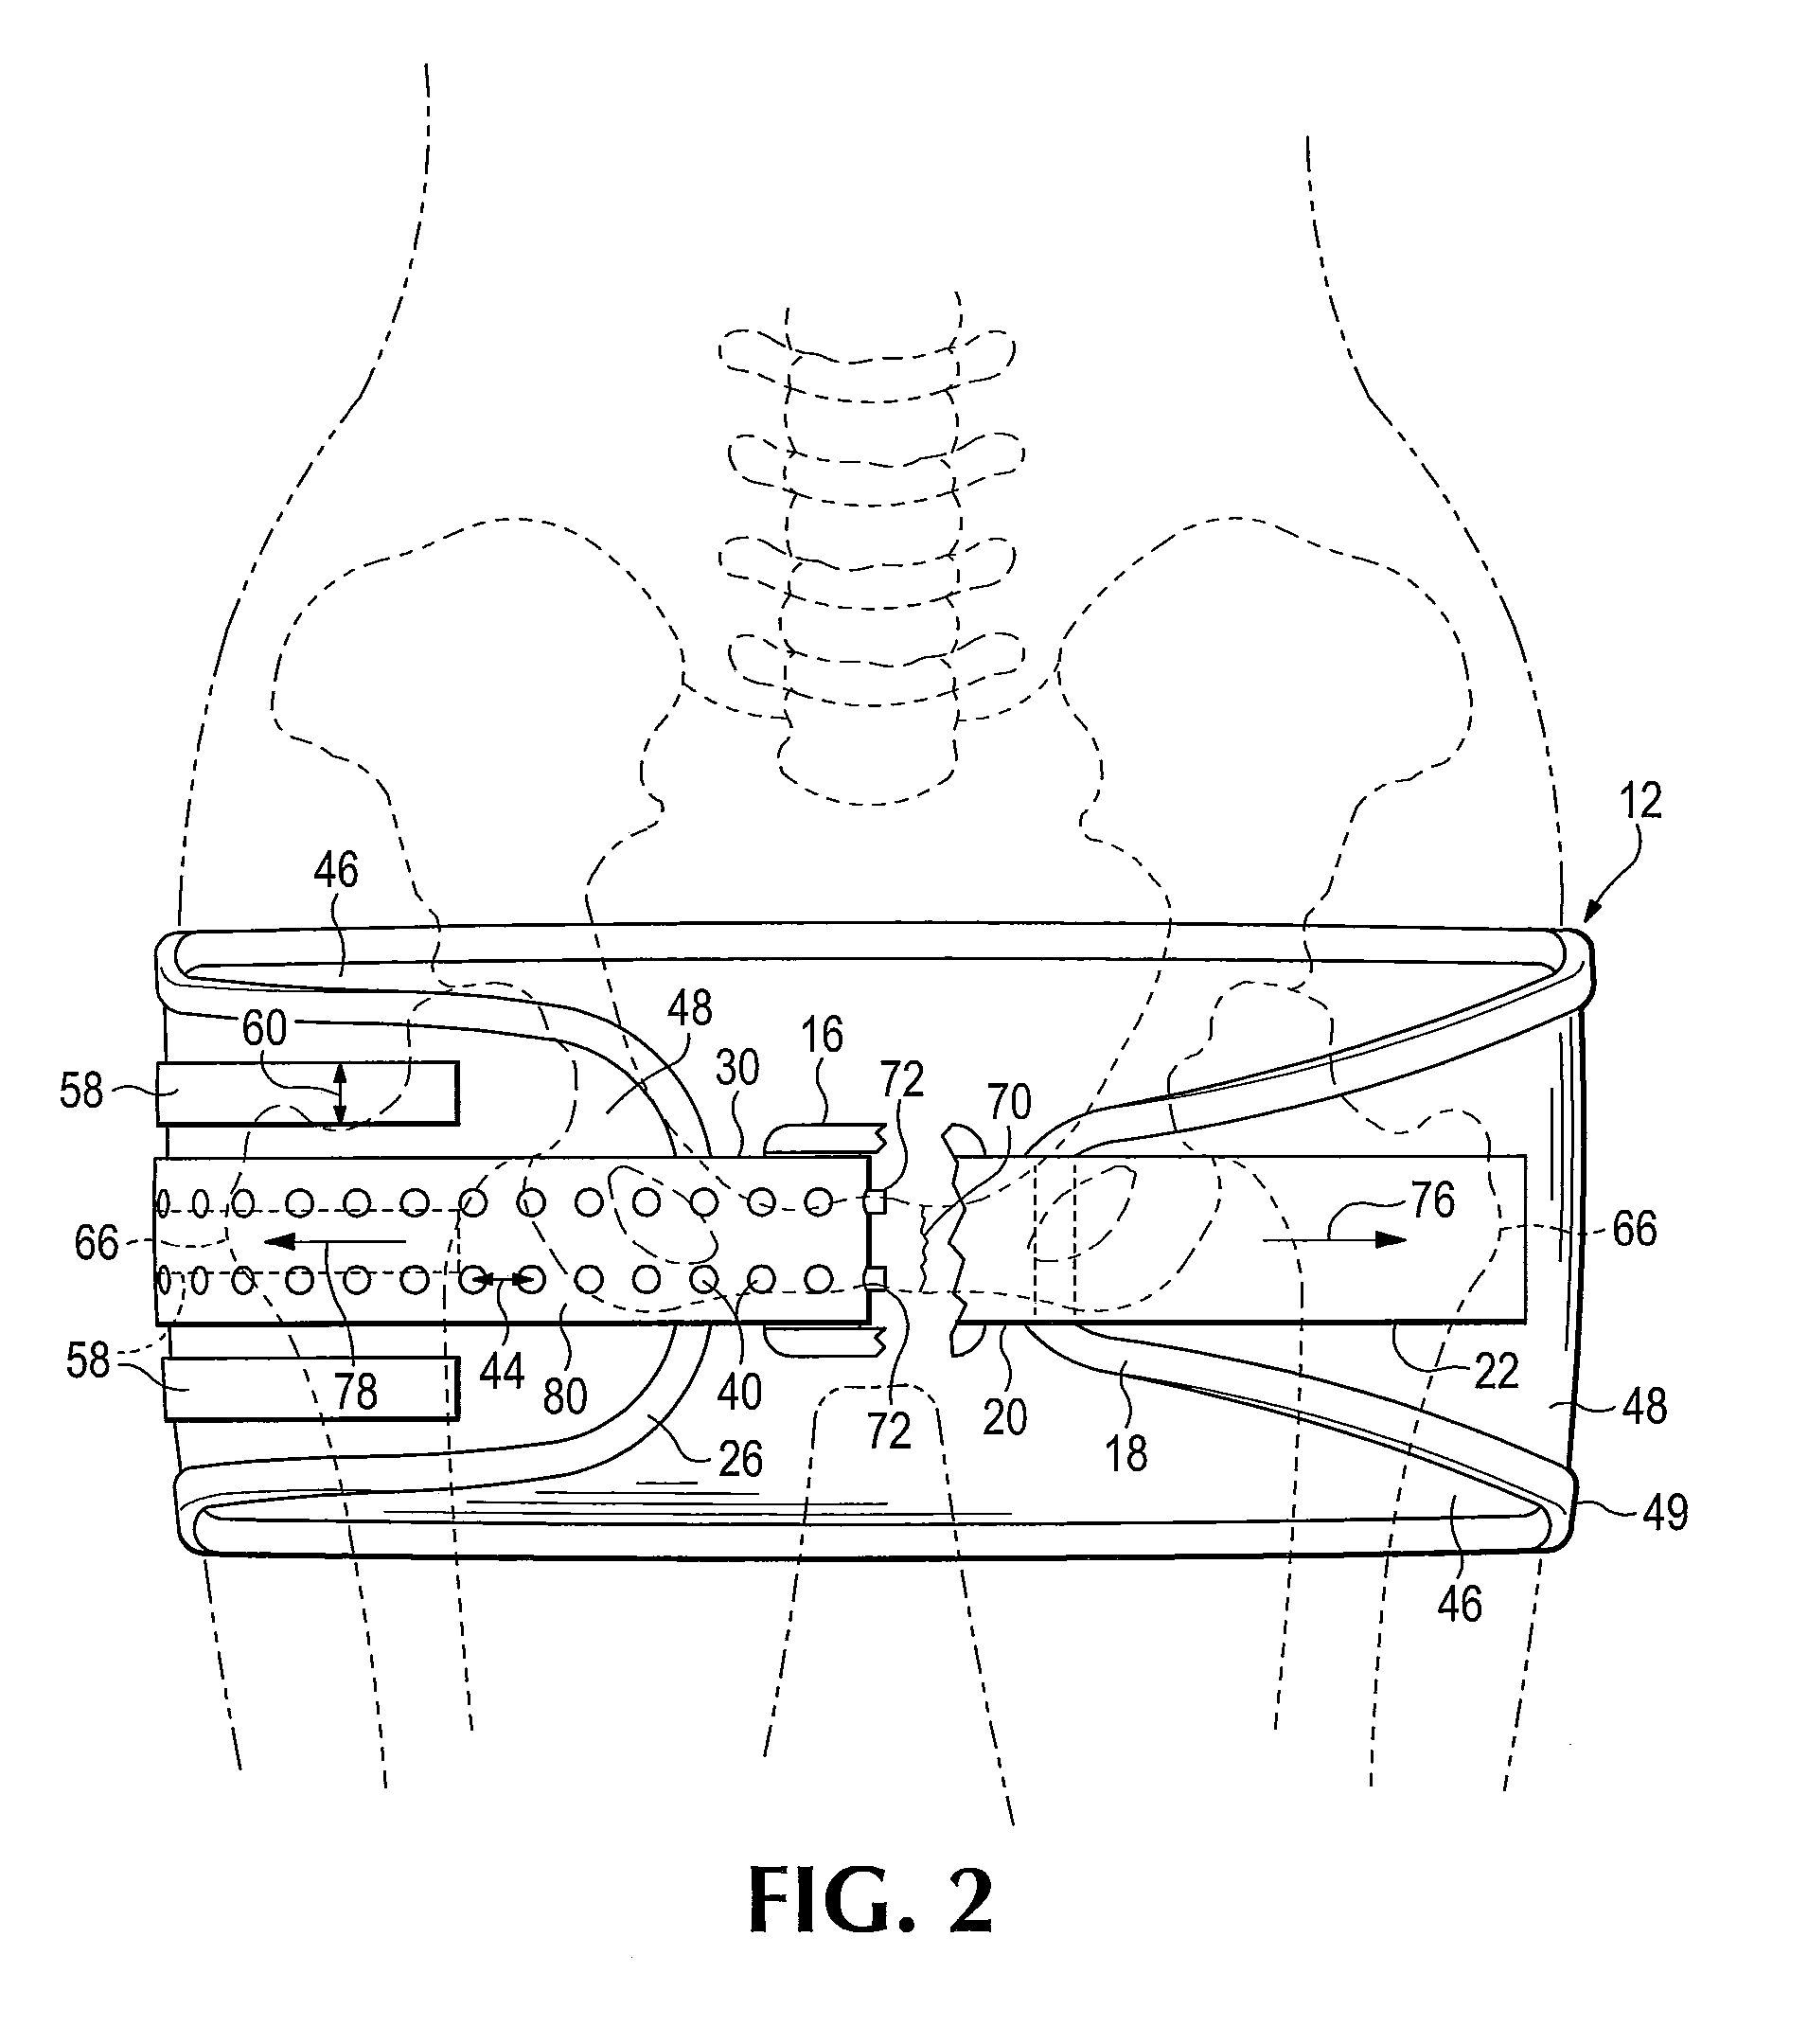 Device and method for control of hemorrhage